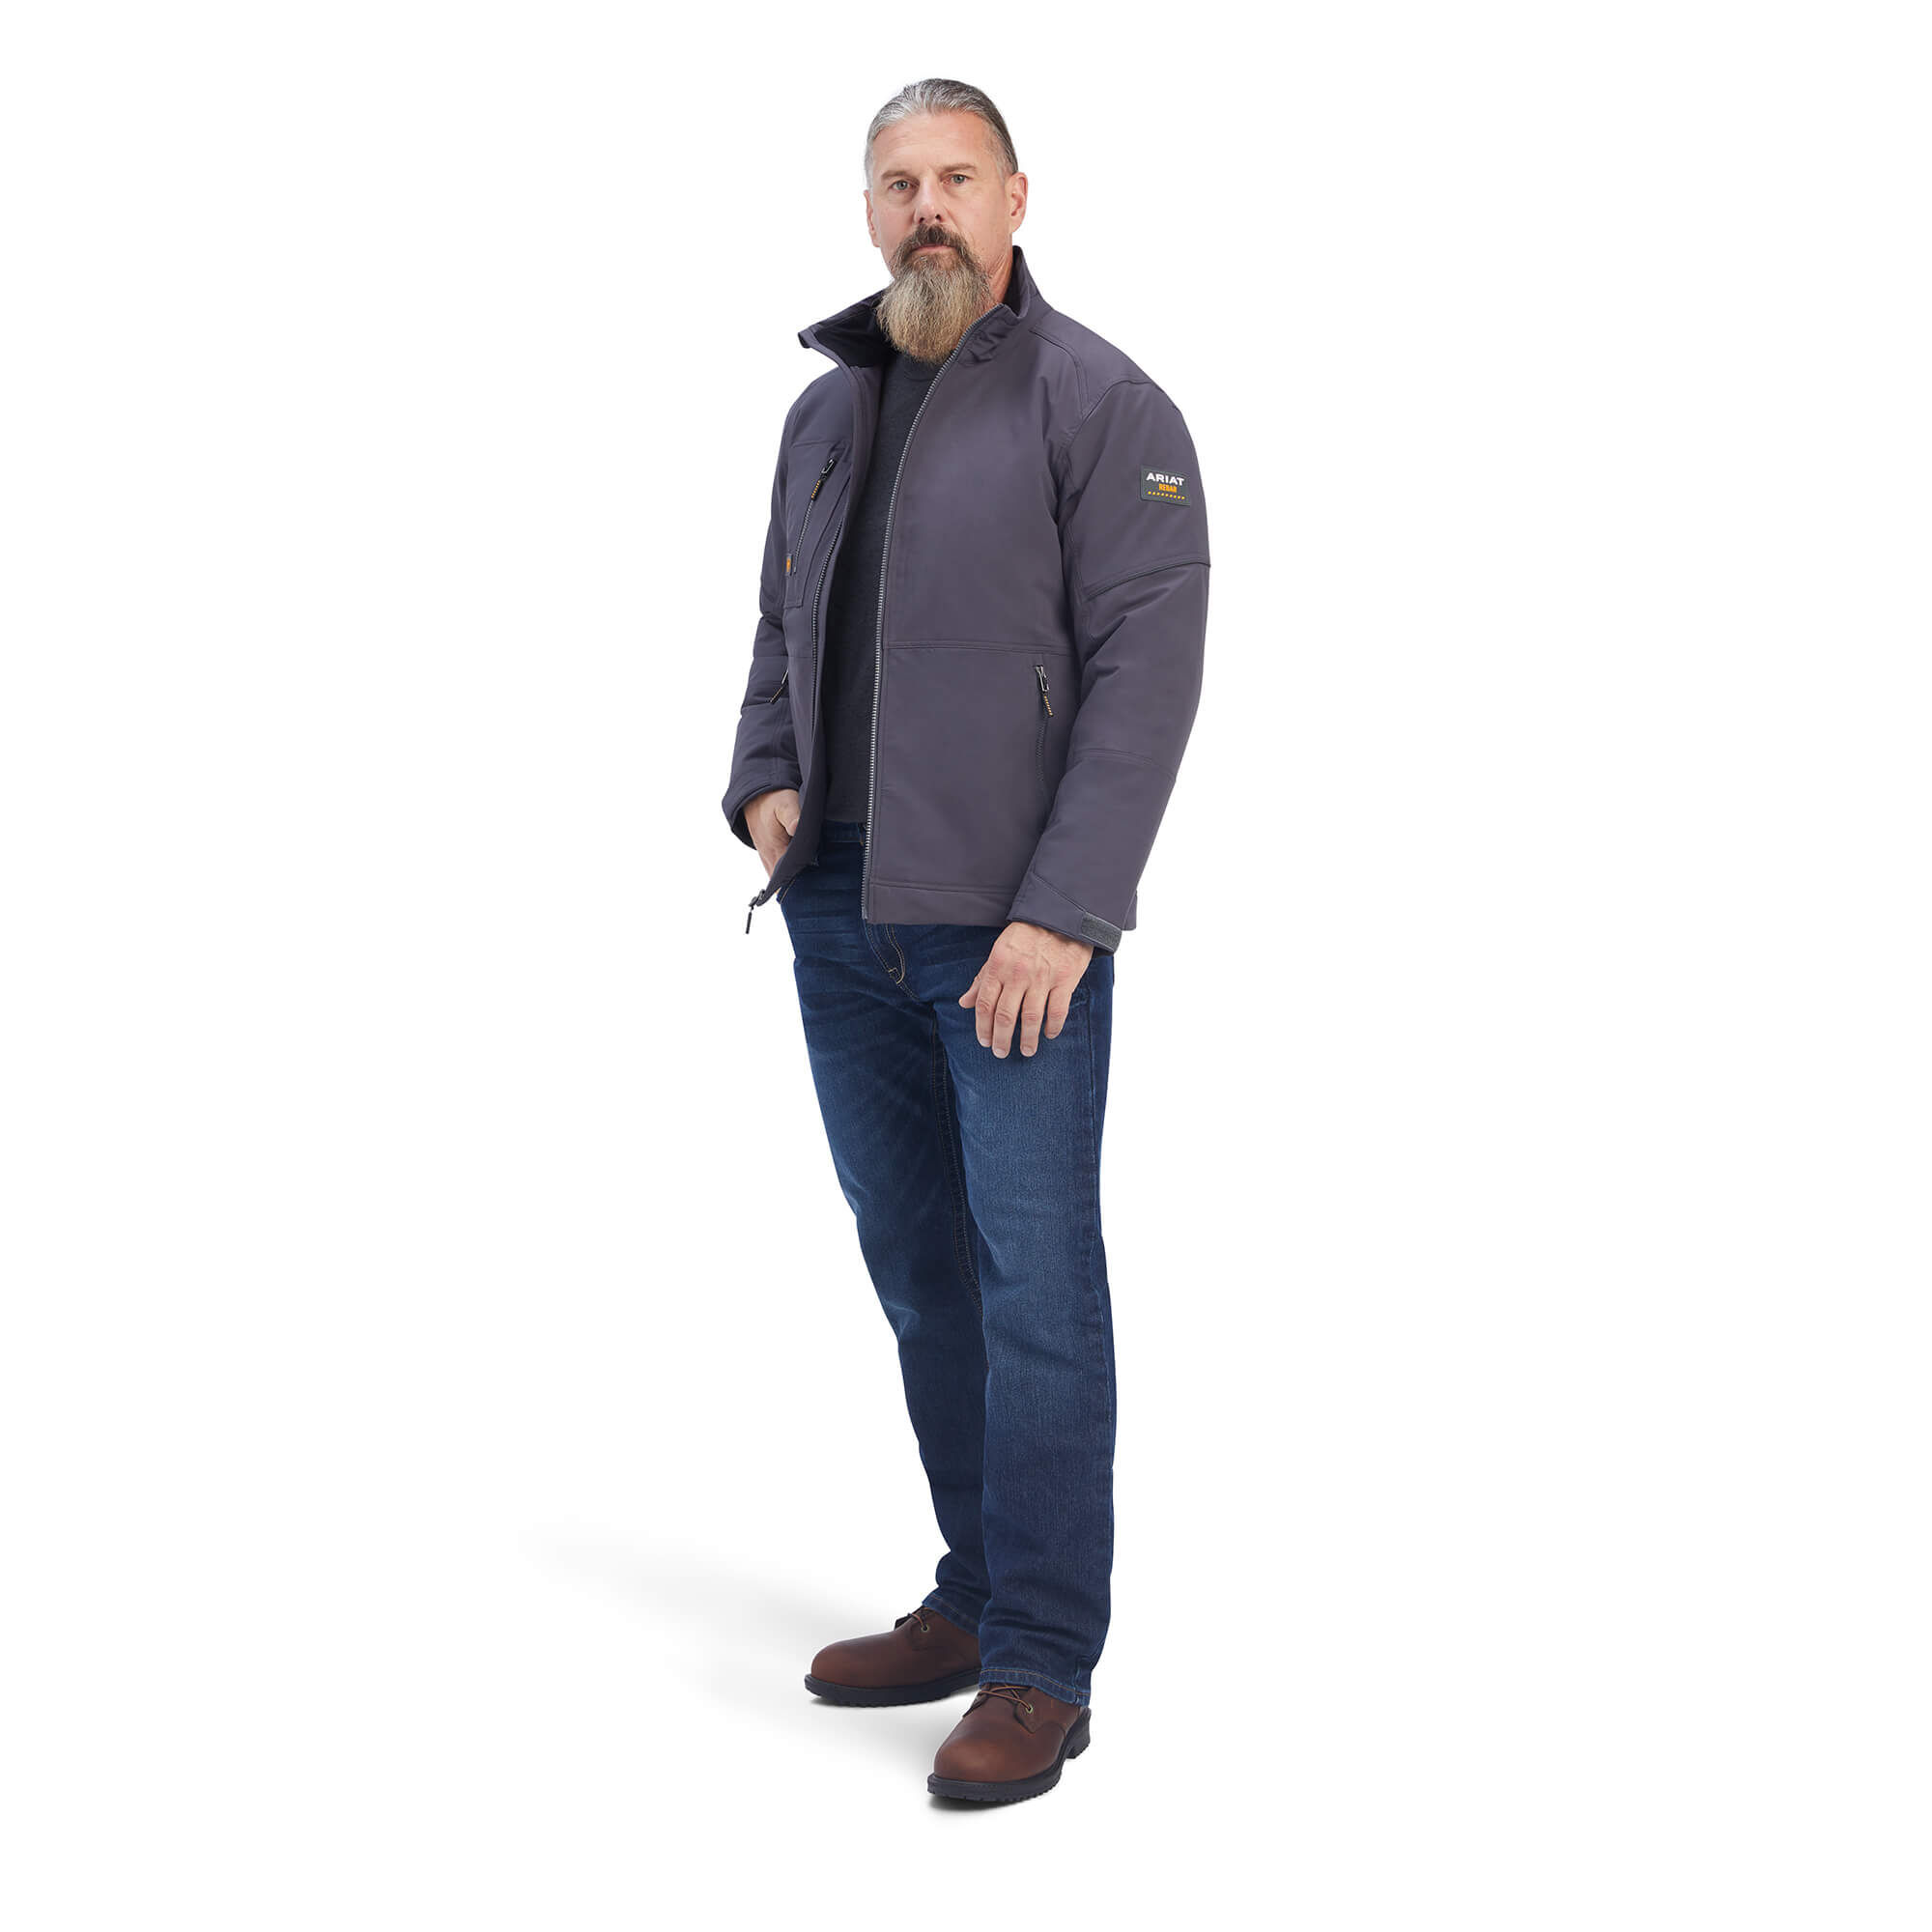 Men's Rebar DriTEK DuraStretch Insulated Jacket in Periscope Grey, Size:  Large_Tall by Ariat